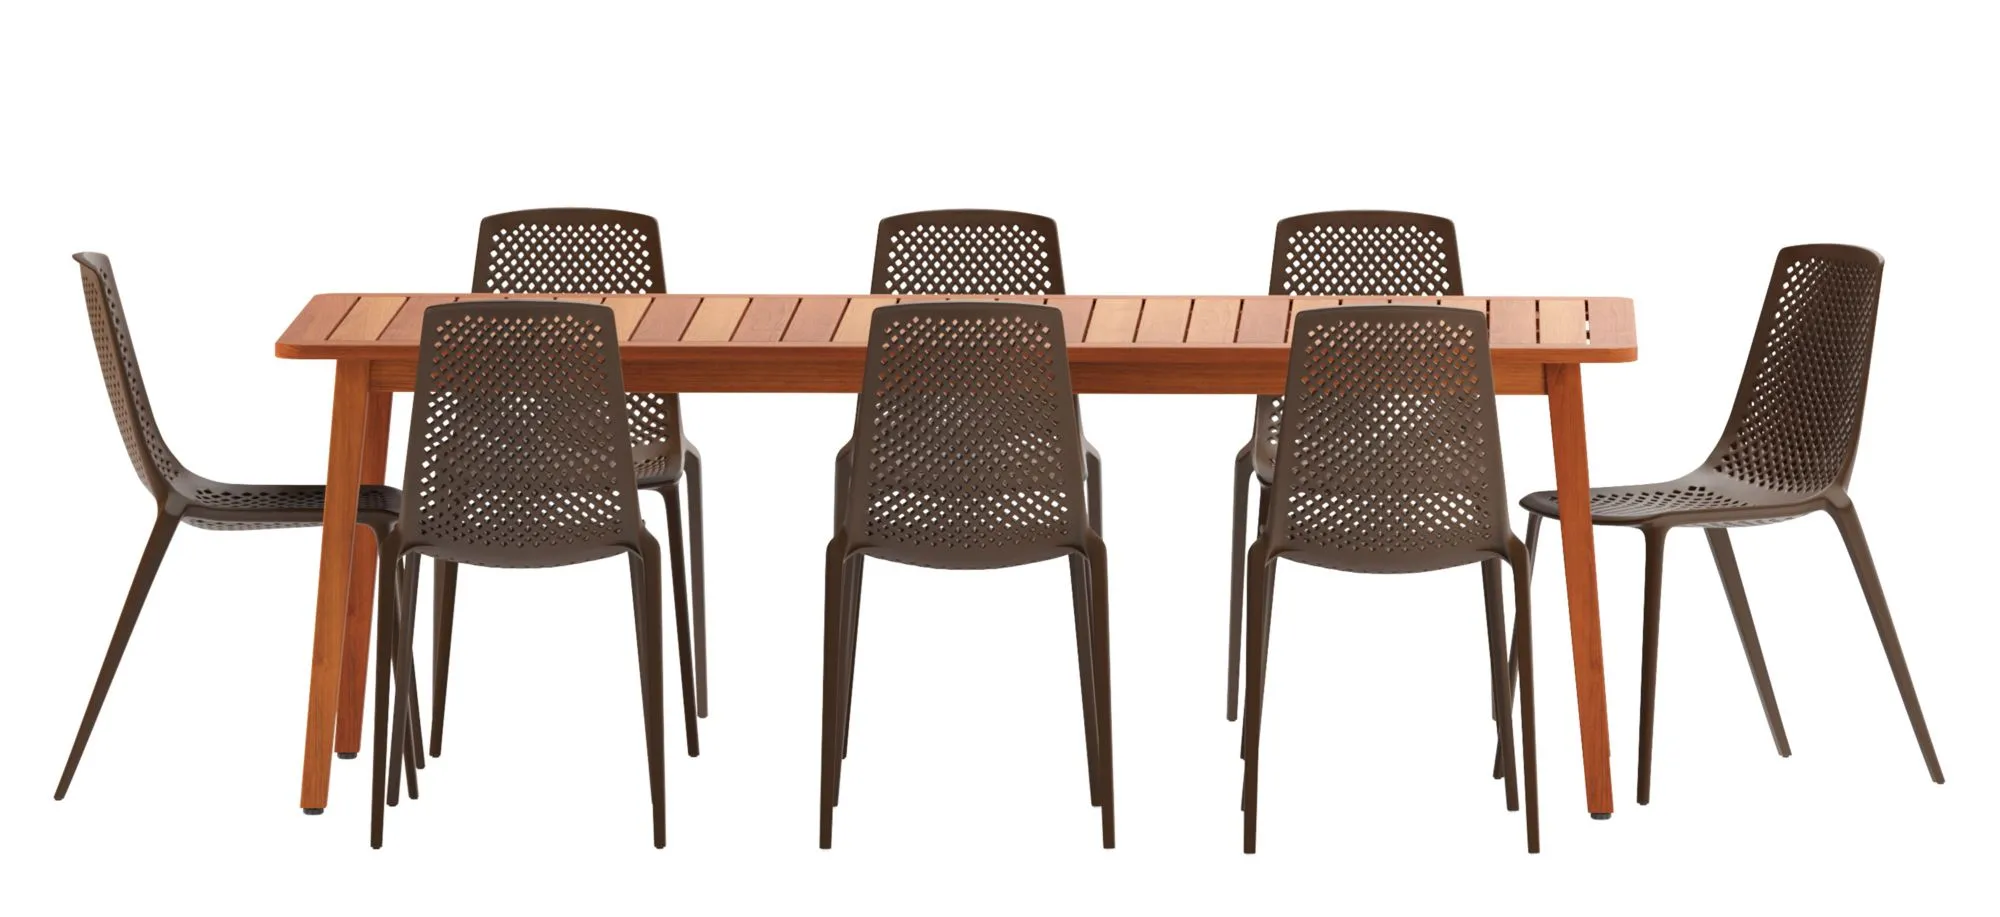 Amazonia 9-pc. Outdoor Rectangular Patio Dining Set in Gray Rope by International Home Miami